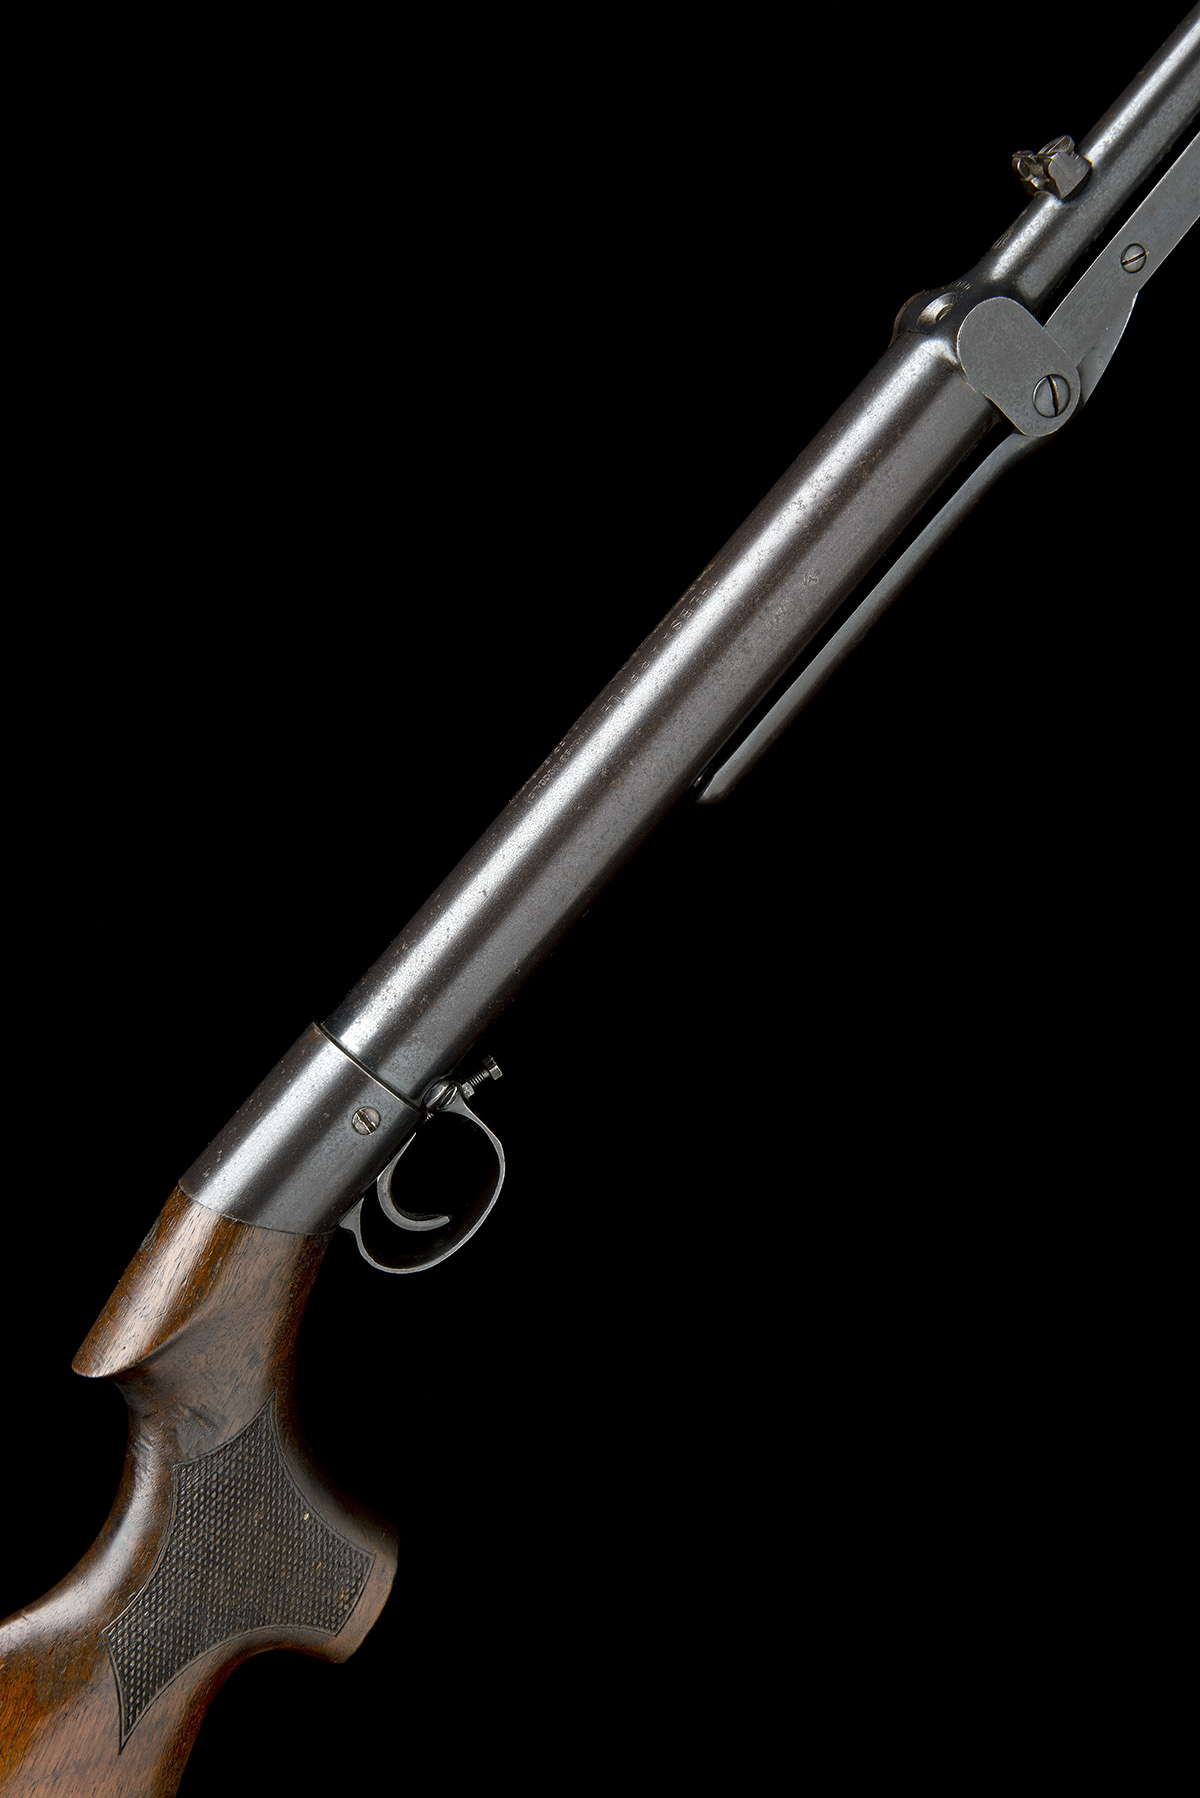 BSA, BIRMINGHAM A .177 UNDER-LEVER AIR-RIFLE, MODEL 'IMPROVED MODEL 'D'', serial no. 32930, for